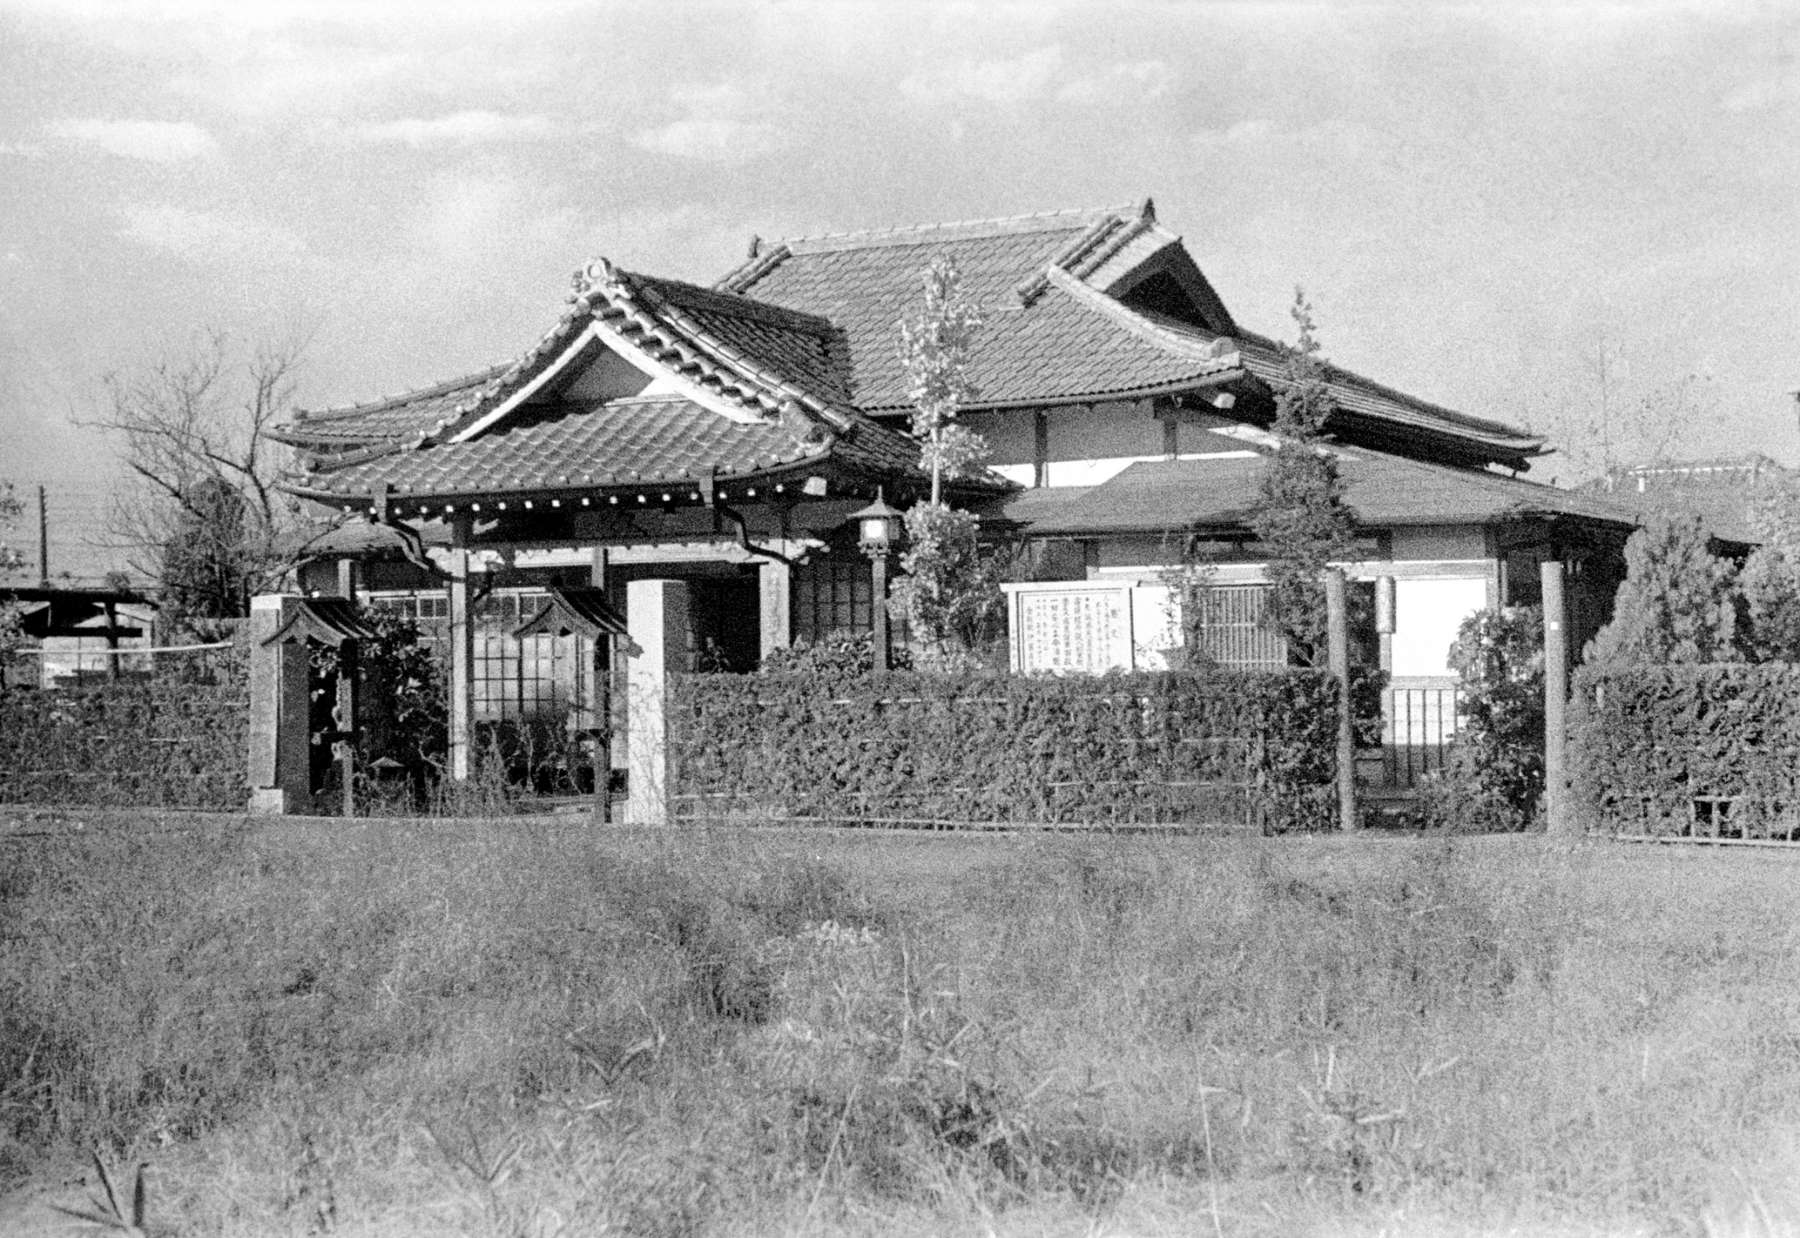 A temple with tiled, peaked roofs, surrounded by hedges stands across from an empty field of grass.